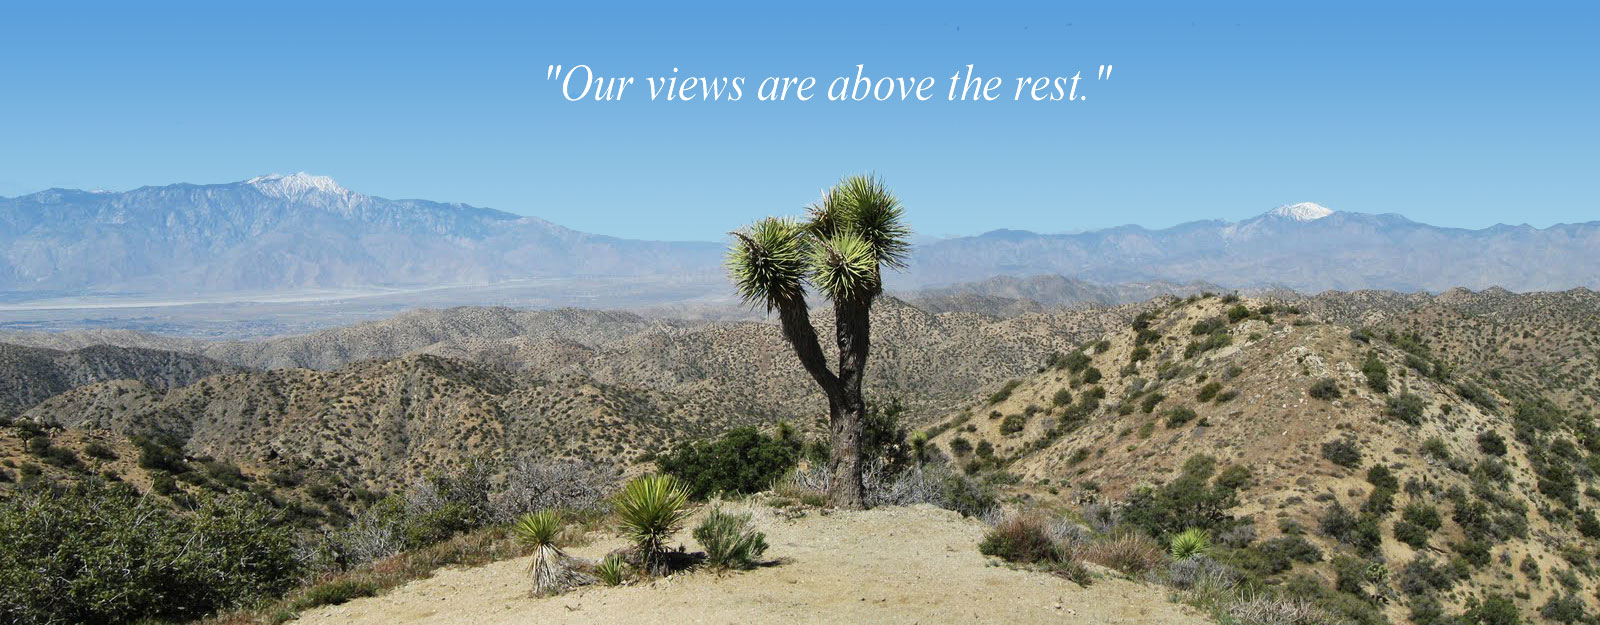 Our Palm Springs tours will take you to amazing vistas!